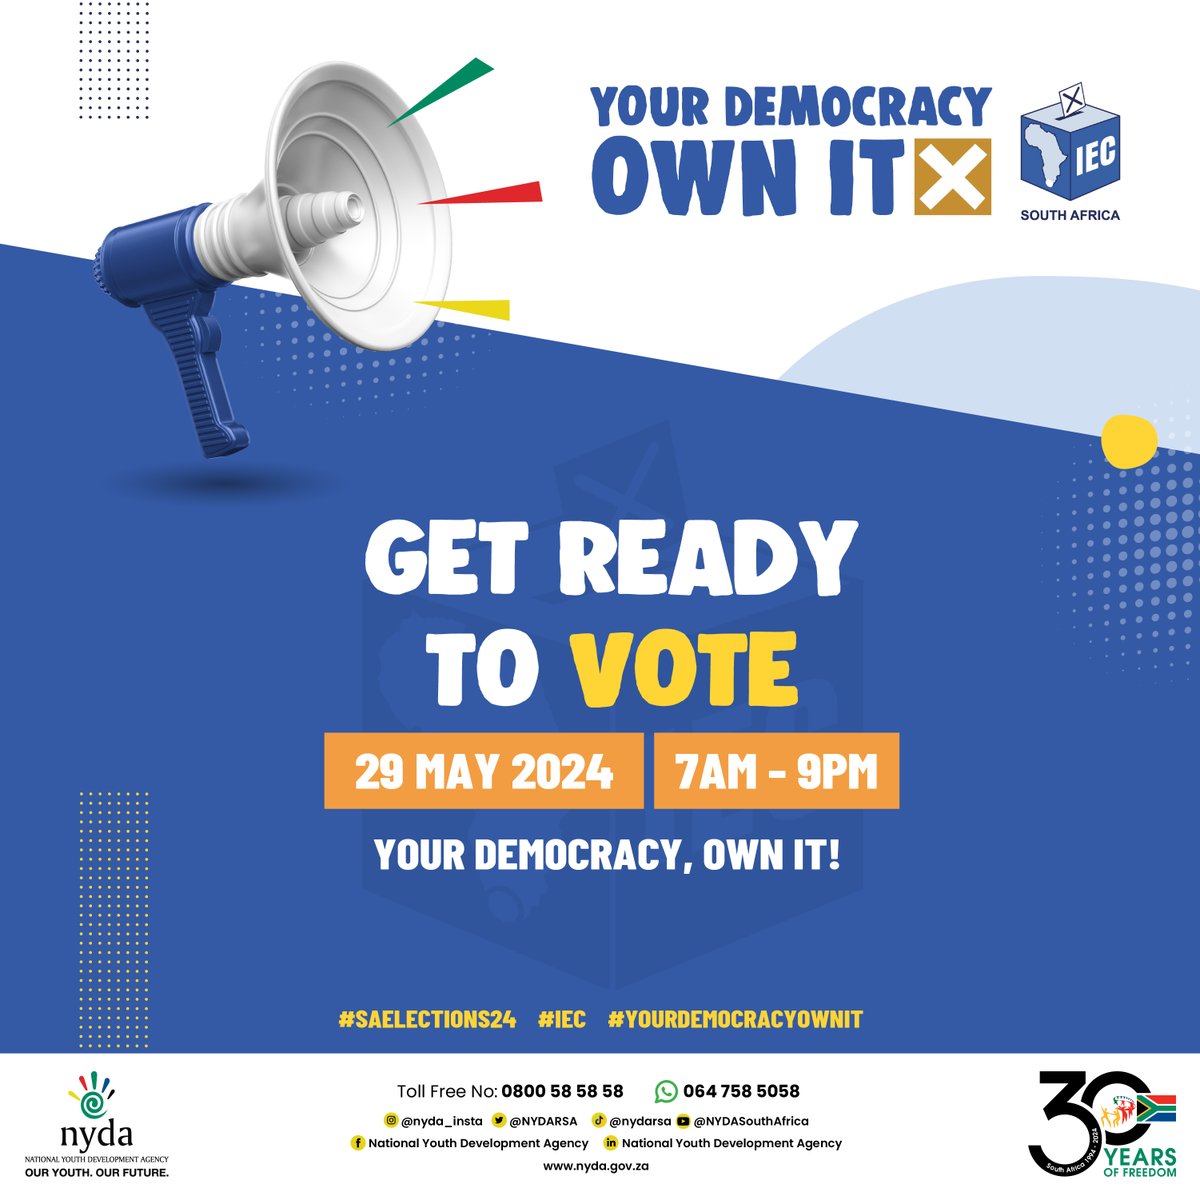 🗳️ Mark your calendars! 🗳️ 📅29 May 2024 📅 Exercise your right to vote between 7am to 9pm. 🕖 Your voice matters, so make sure to own your democracy! #GetReadyToVote #DemocracyInAction #ElectionDay #ExerciseYourRight #SAELECTIONS24 #IEC #YOURDEMOCRACYOWNIT